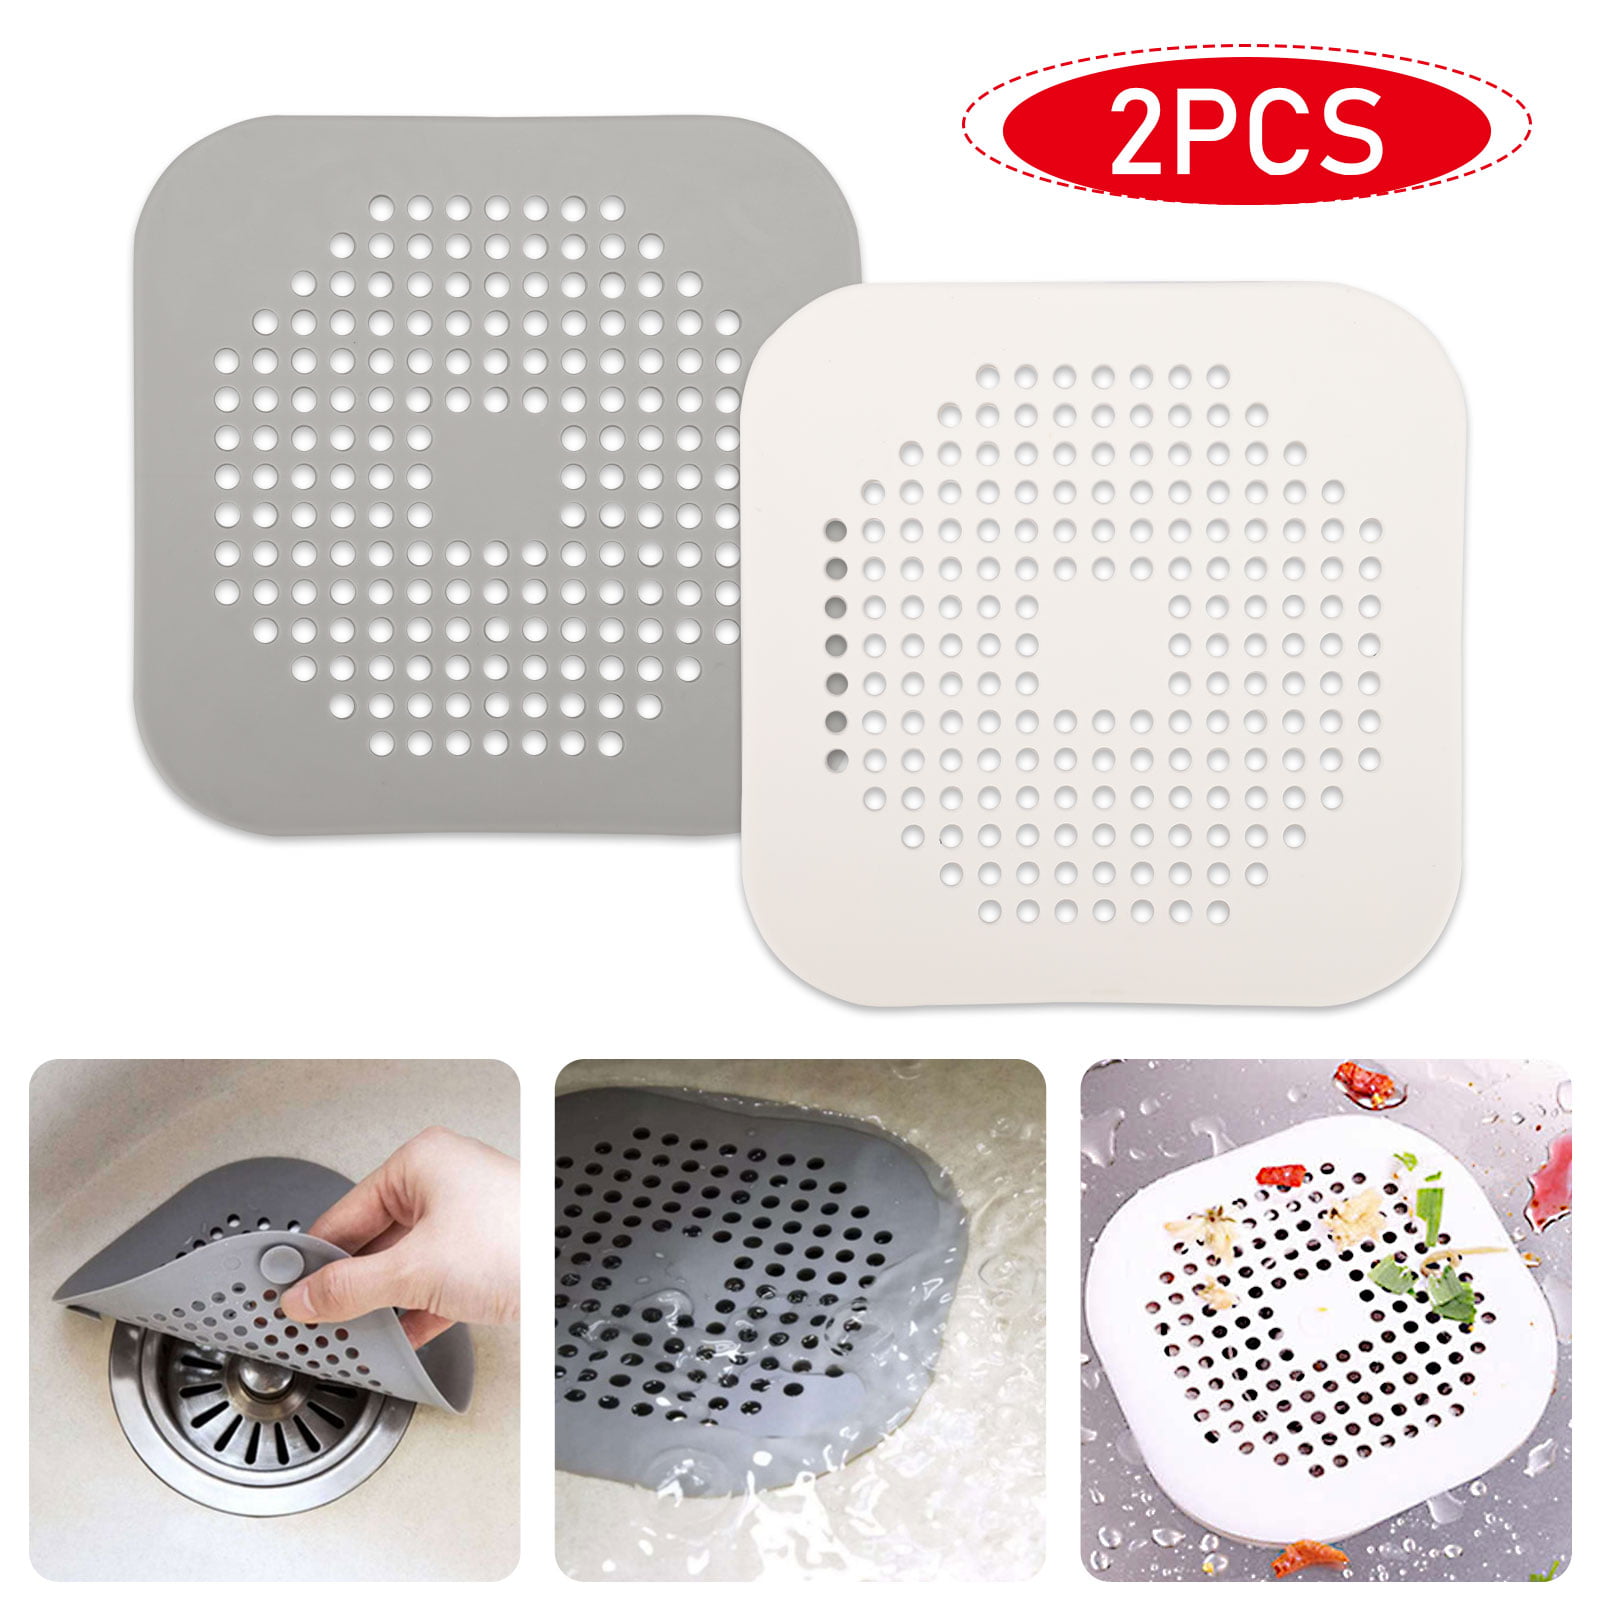 ukoudadao9haowanh Square Drain Cover for Shower TPR Drain Hair Catcher Flat Silicone Plug for Bathroom and Kitchen Under Sink Filter Shower Drain 